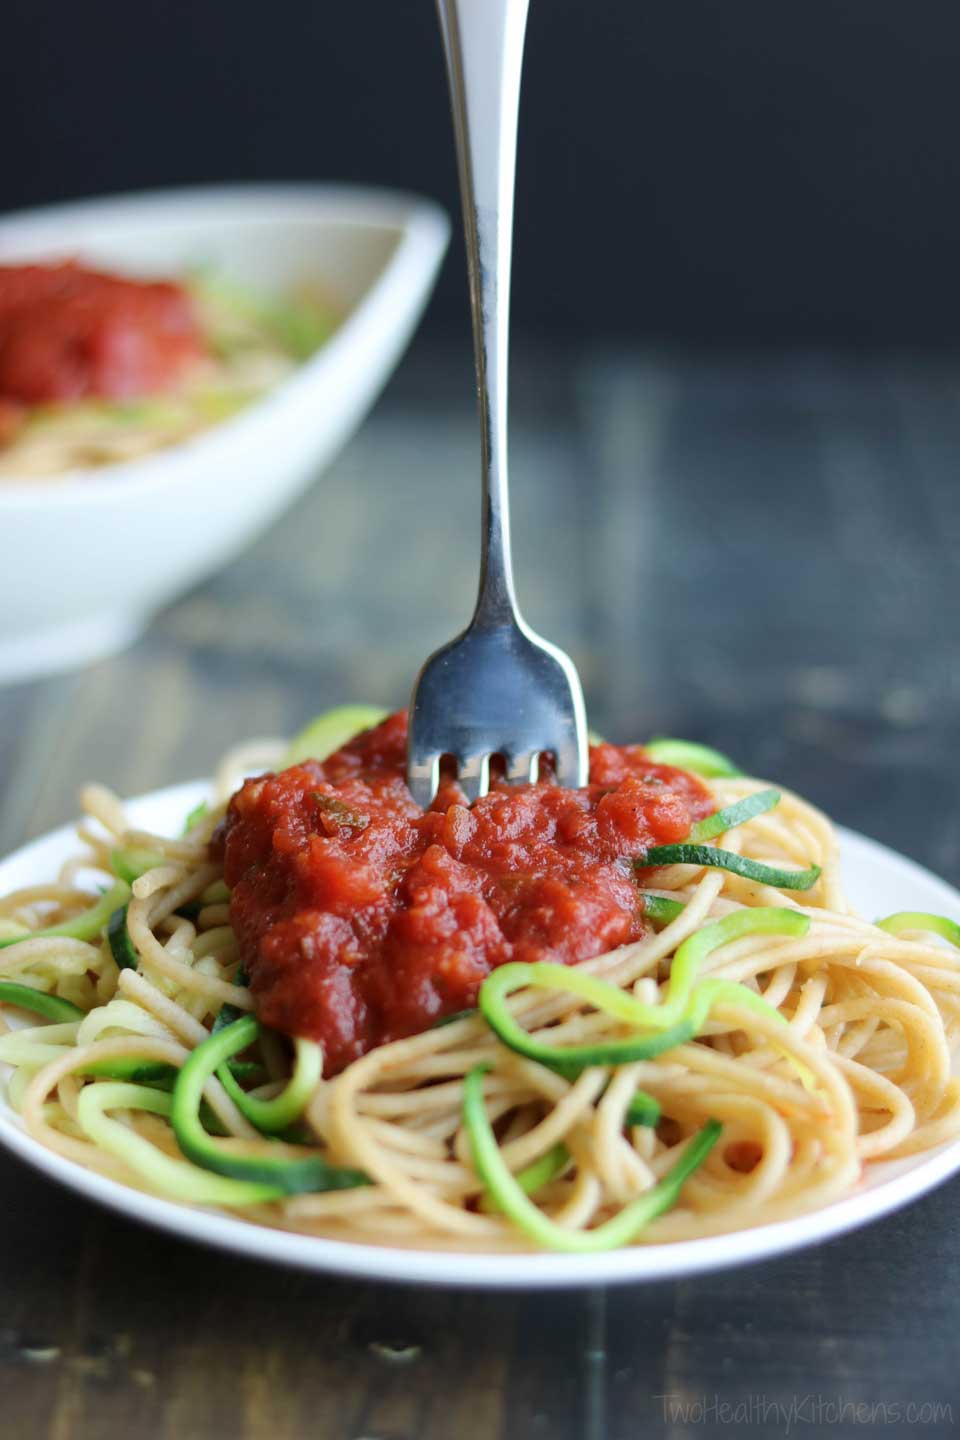 An easy way to try zucchini noodles is to mix them in with your favorite whole wheat spaghetti!